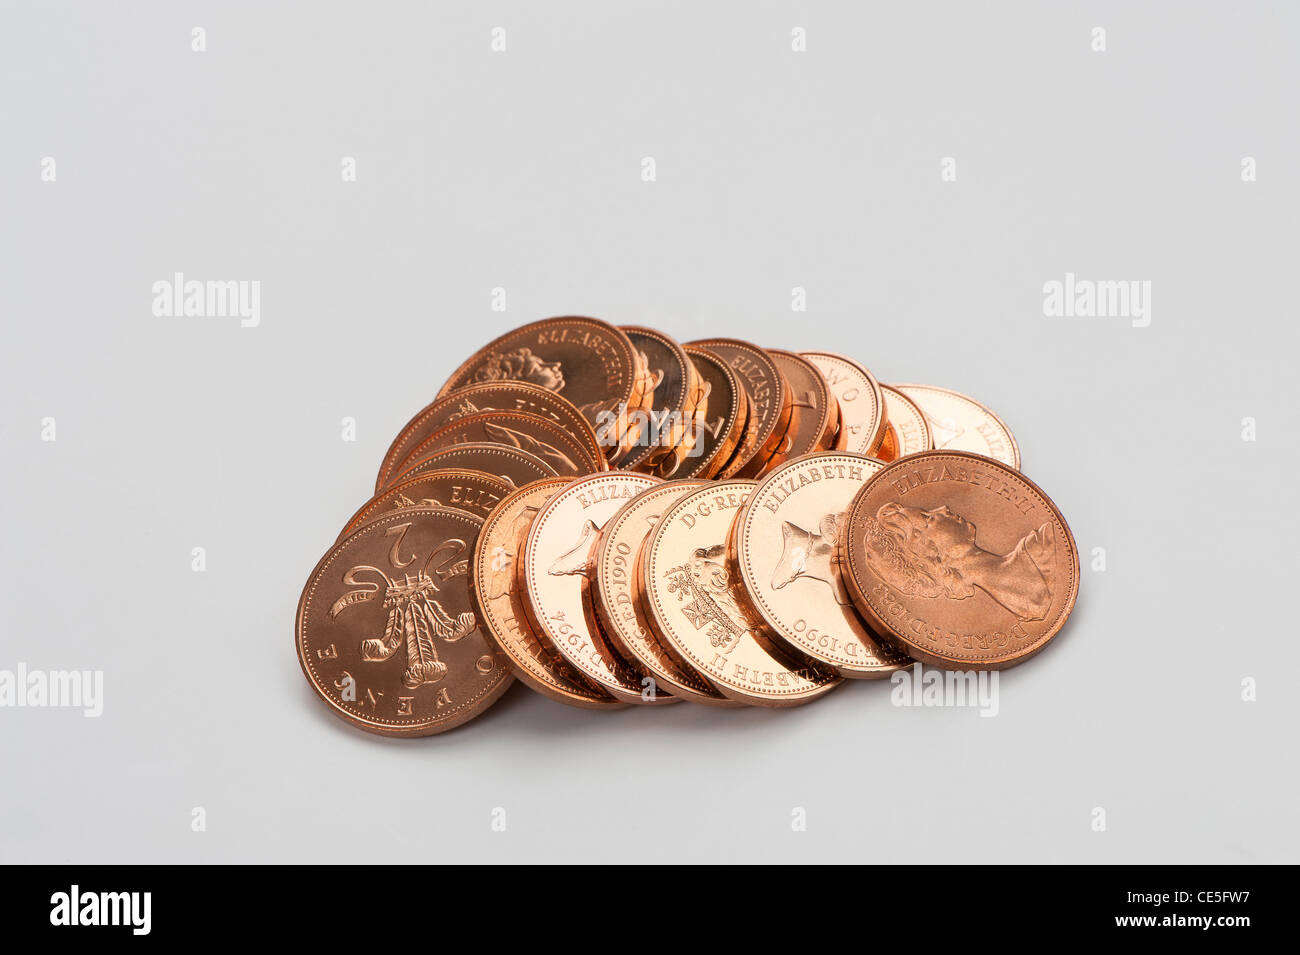 Pile of copper 2p English coins Stock Photo